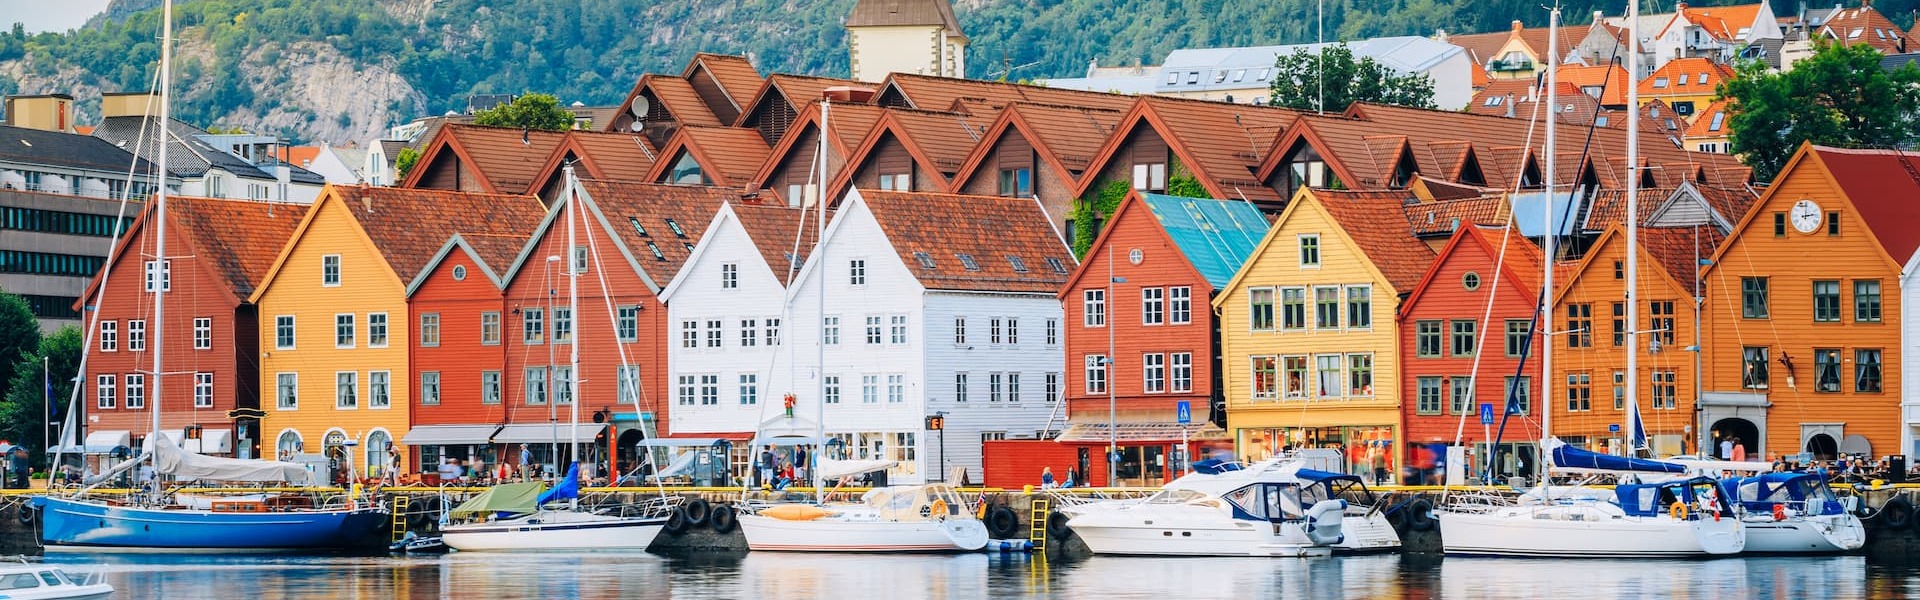 Bergen's colorful coastal buildings by the water with sailboats and mountains in the background